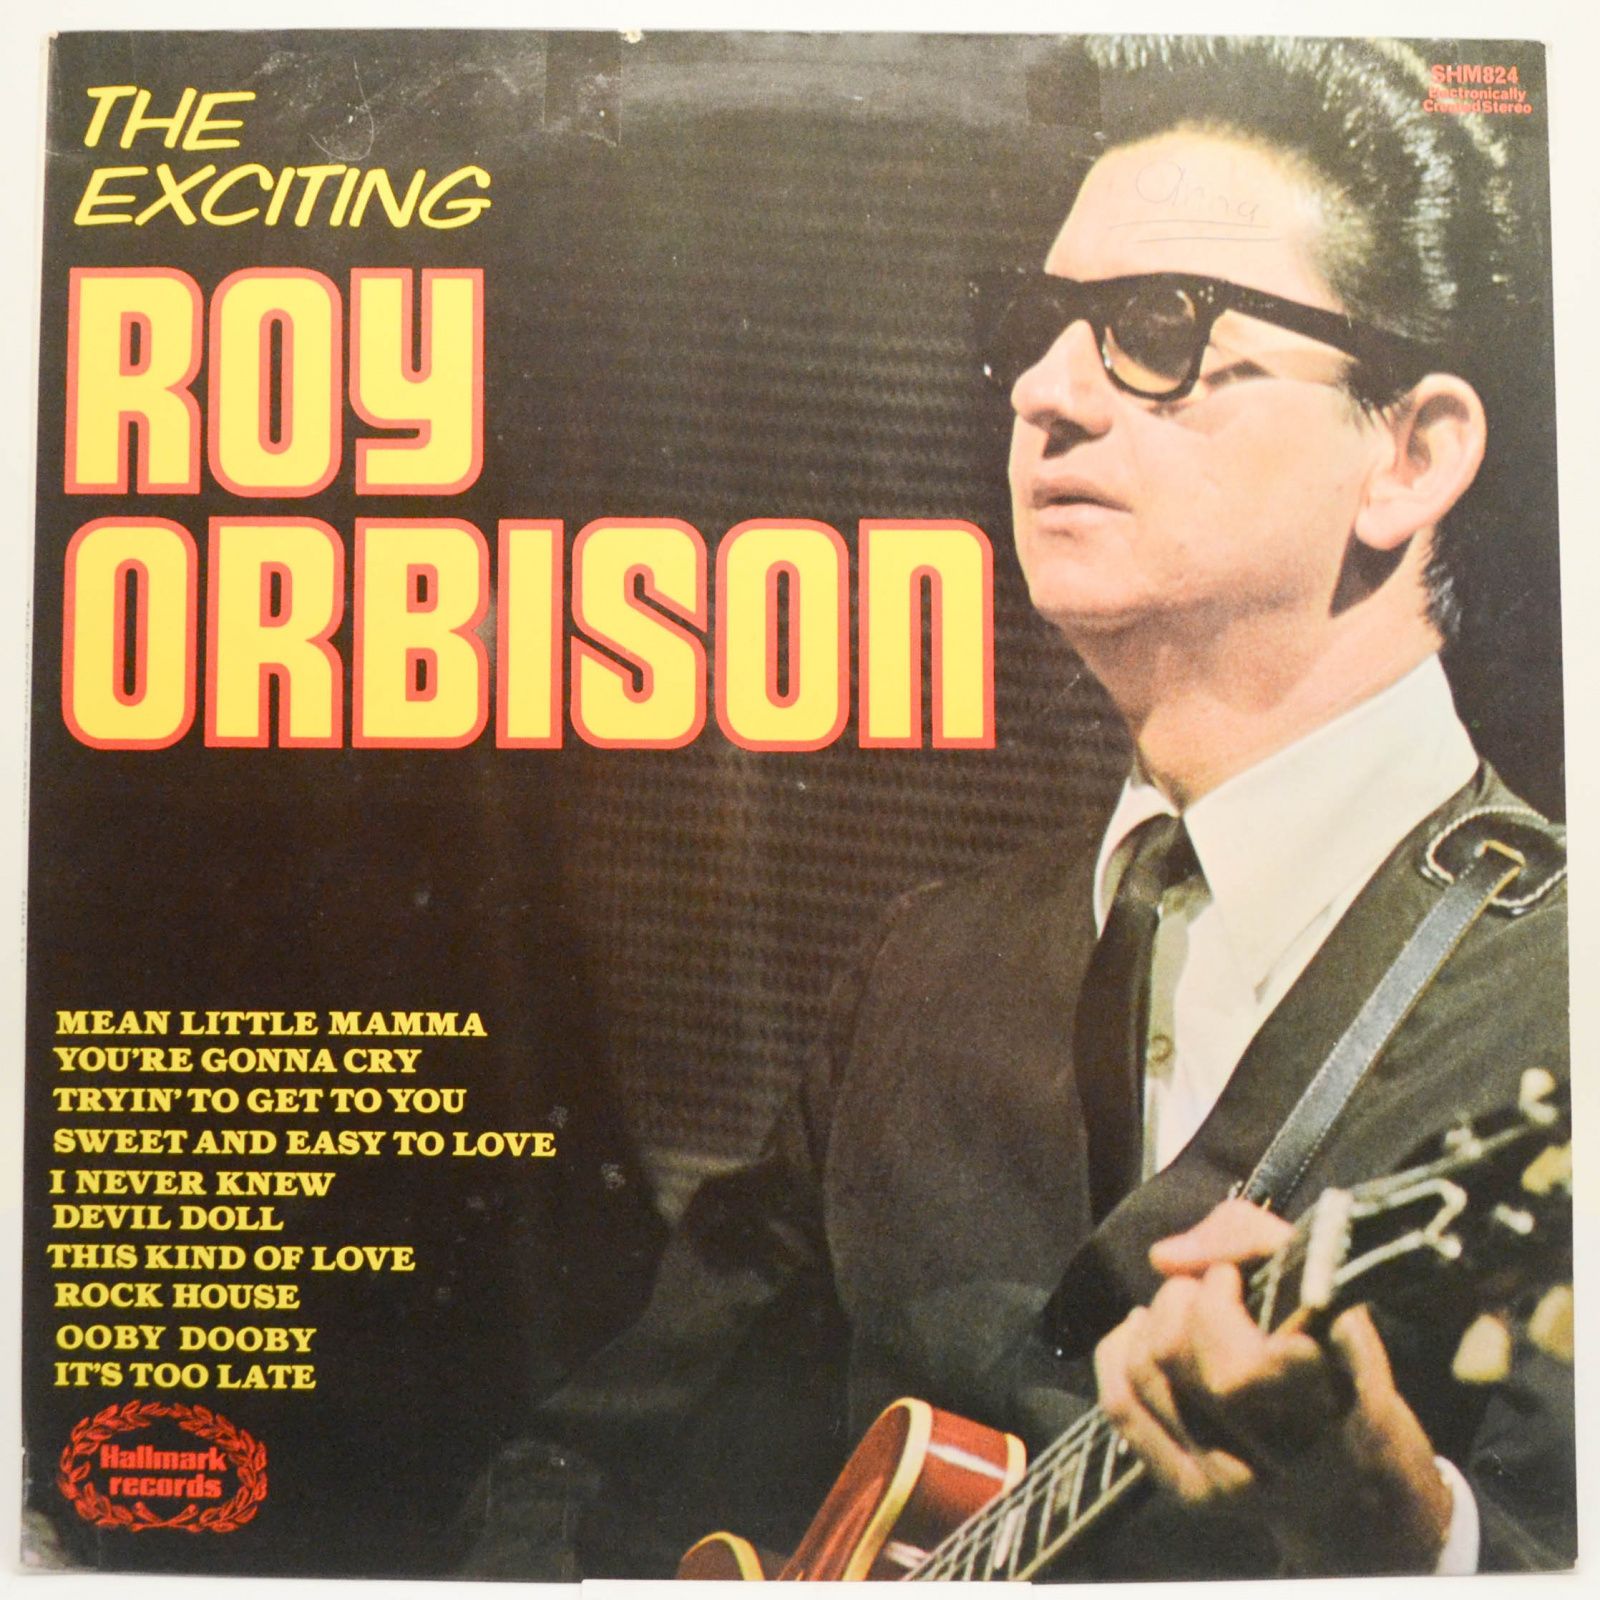 Roy Orbison — The Exciting Roy Orbison, 1974